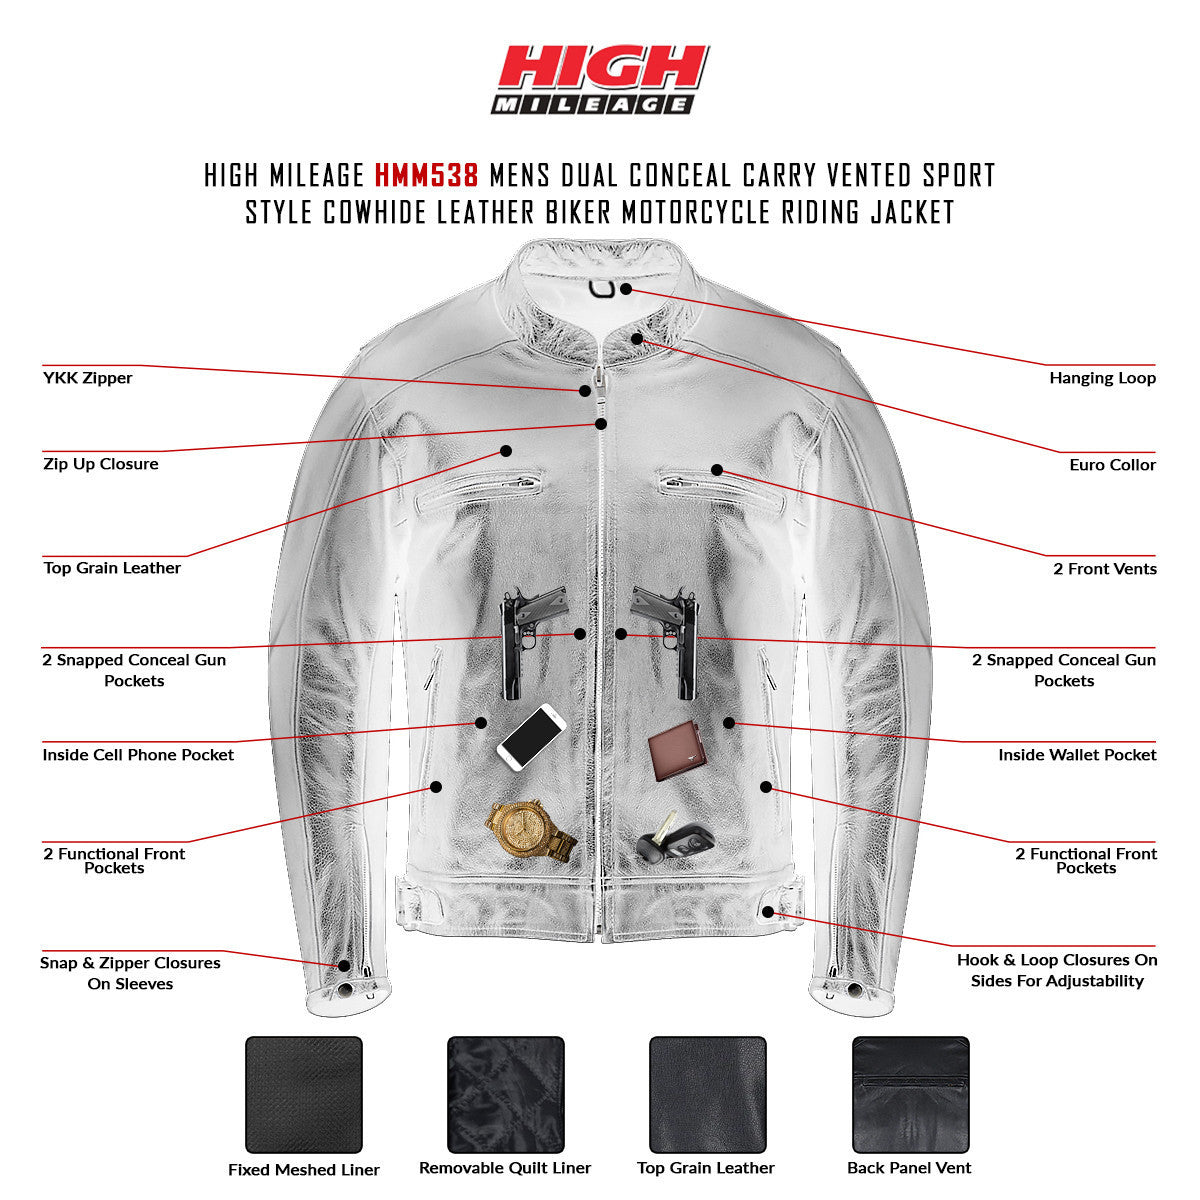 High Mileage HMM538 Mens Dual Conceal Carry Vented Sport Style Cowhide Leather Biker Motorcycle Riding Jacket - Infographics